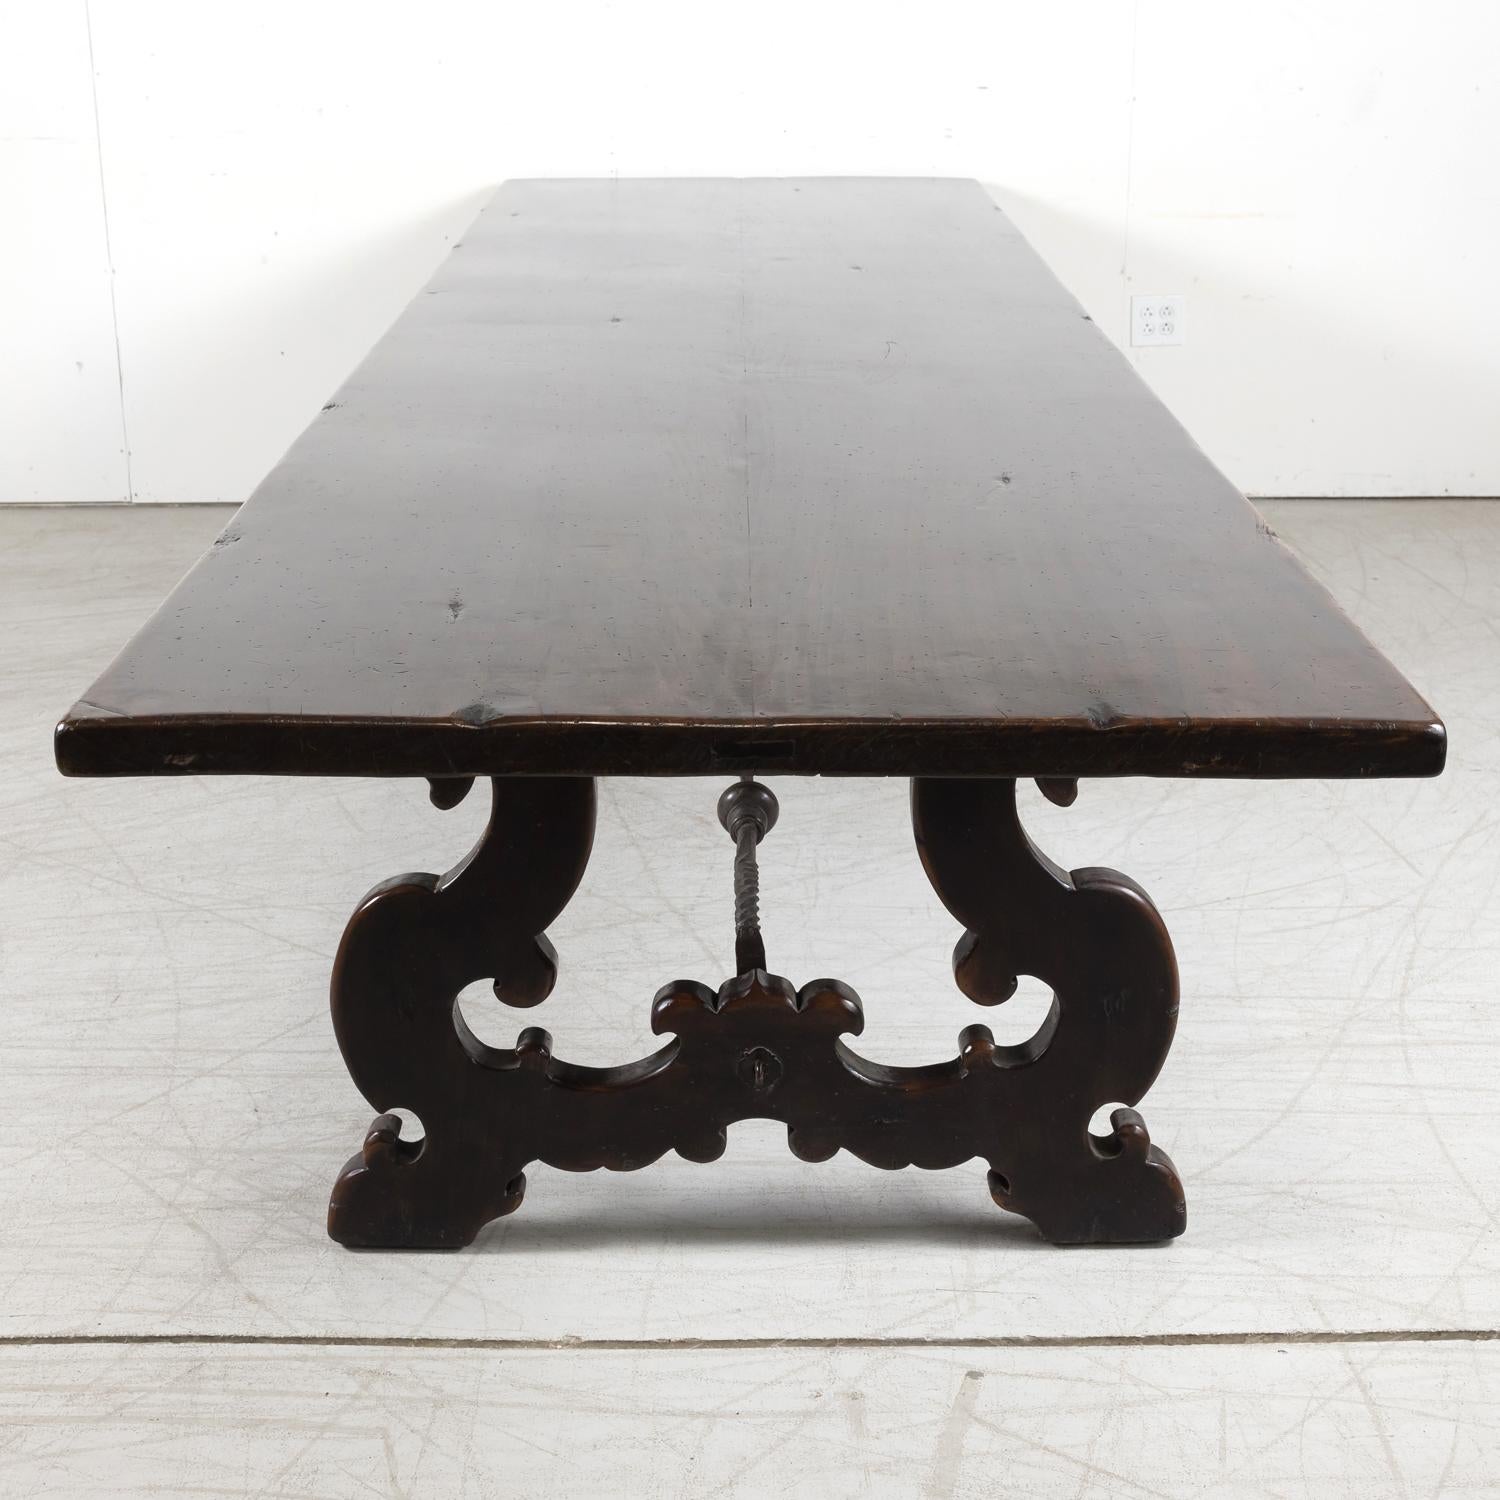 Lge 19th Century Spanish Baroque Style Trestle Dining Table with Iron Stretcher For Sale 9